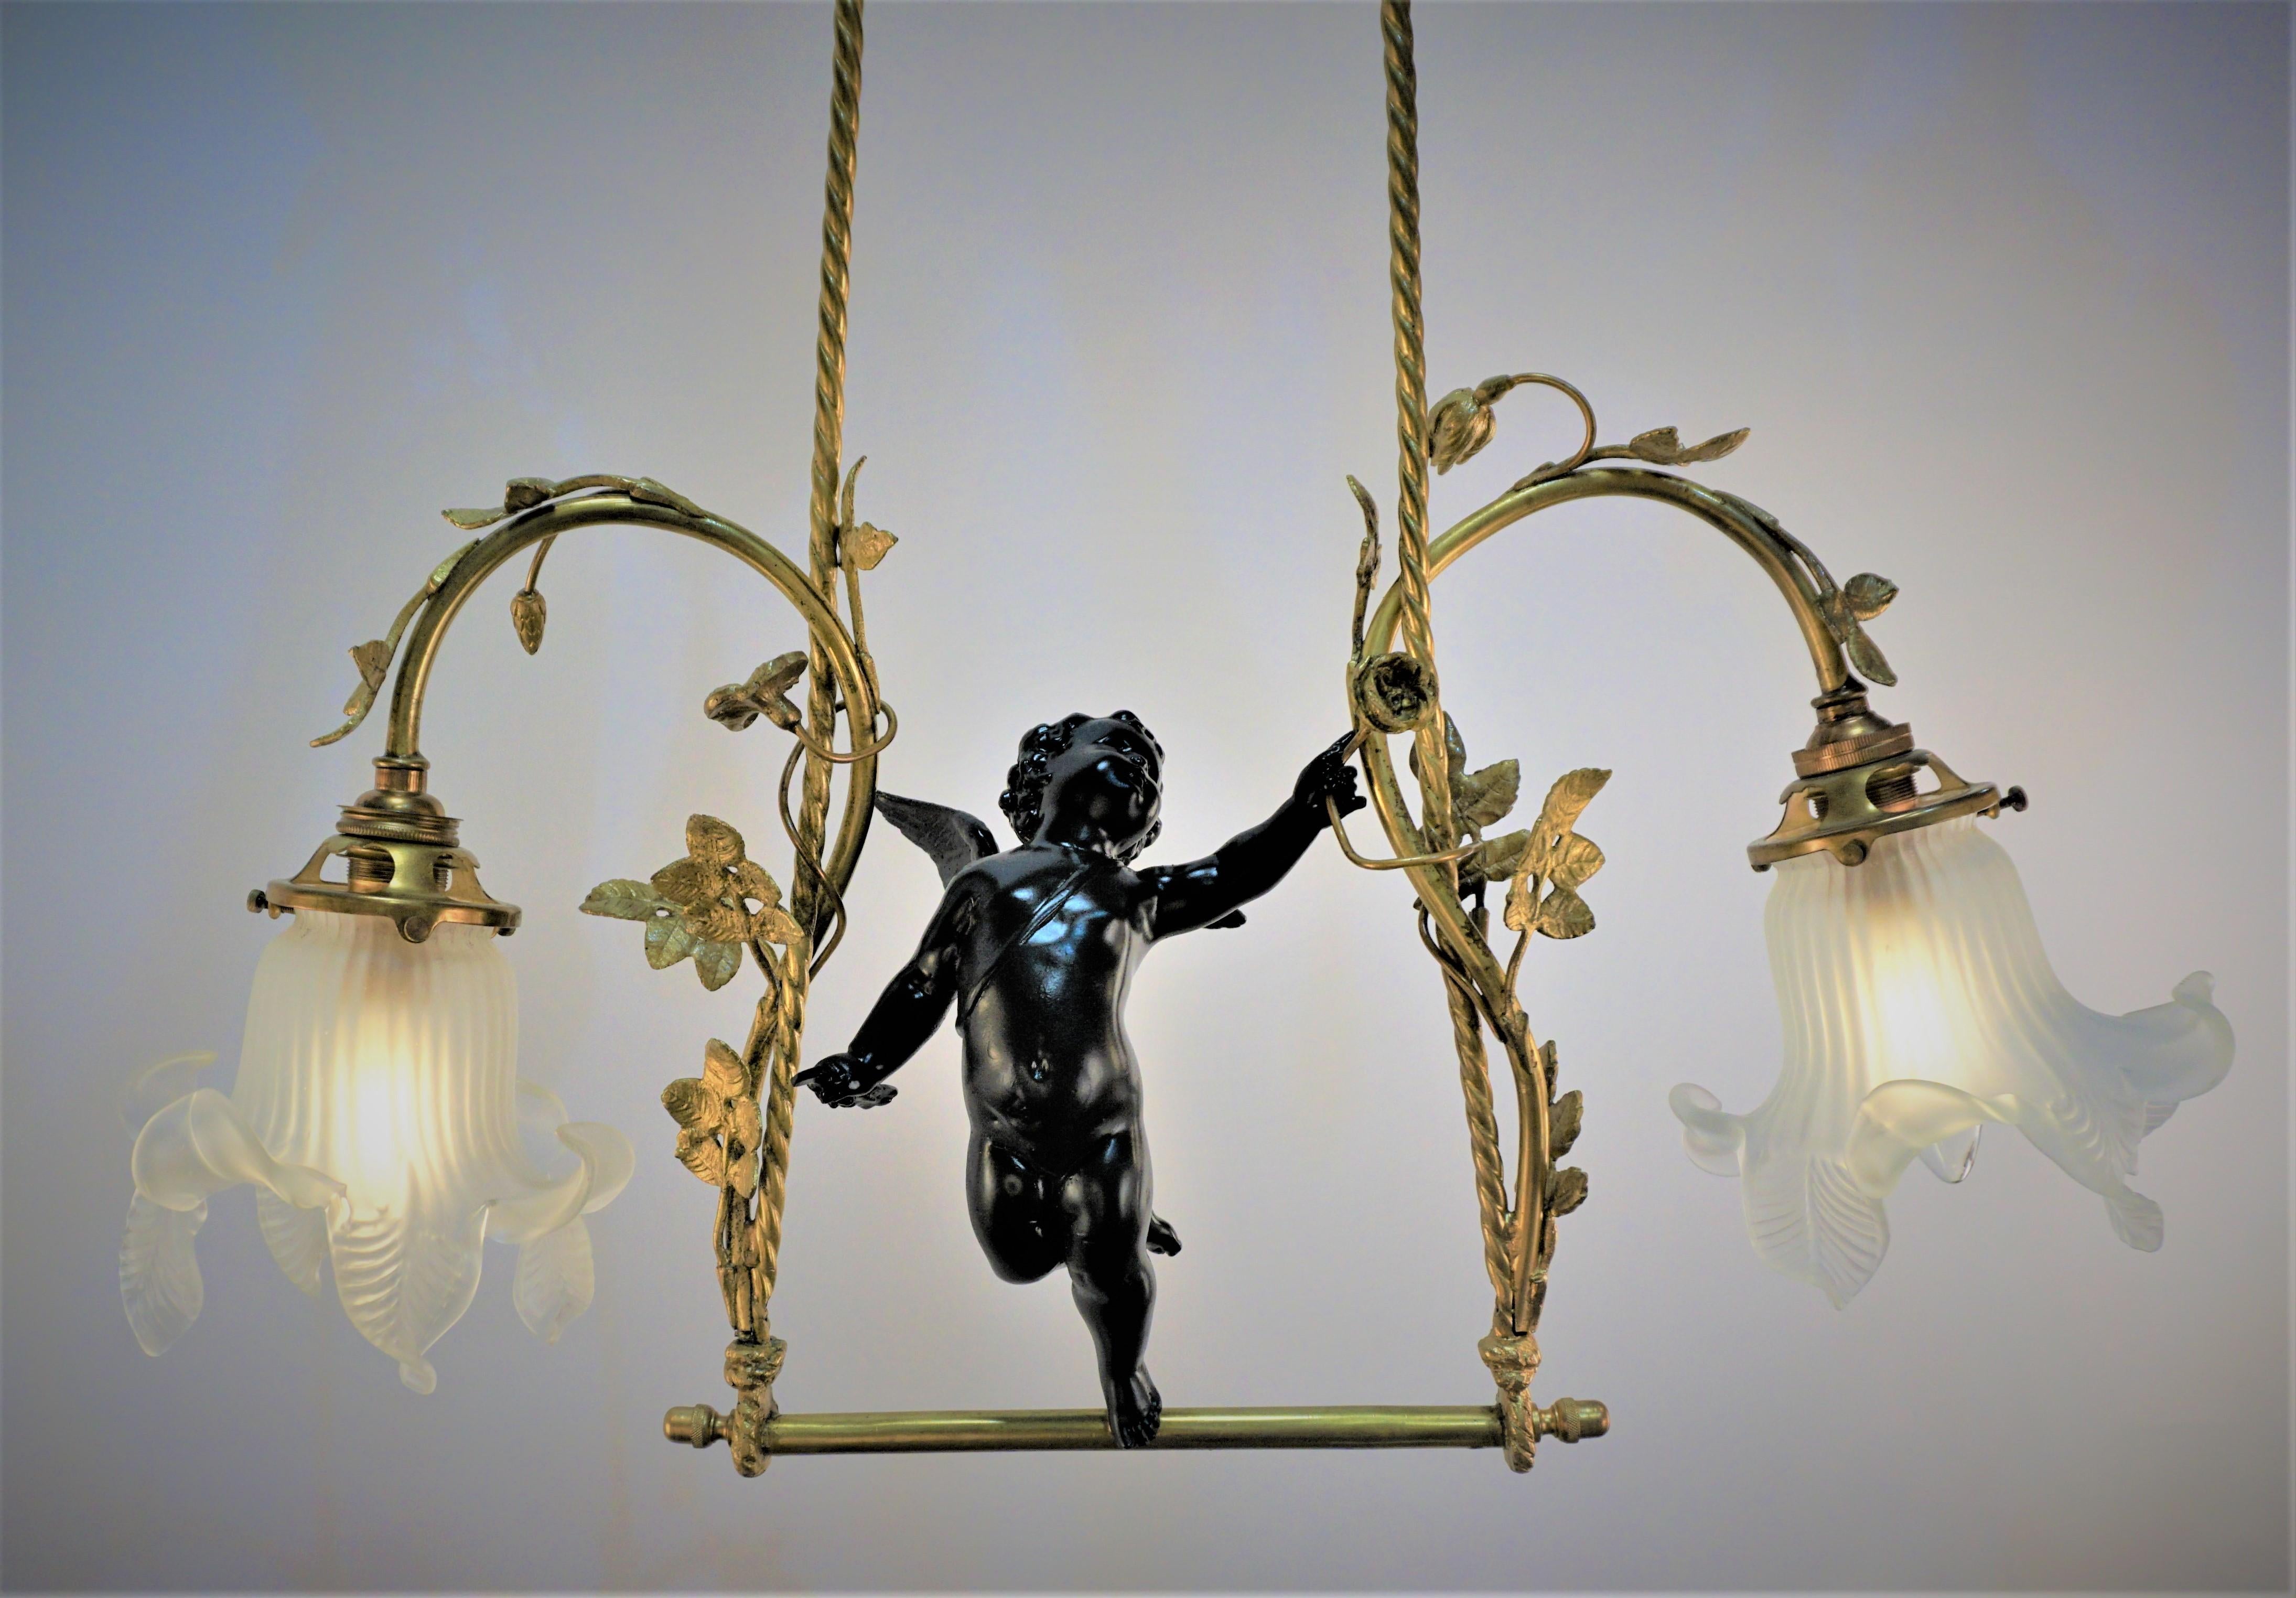 Handcrafted in France during 1910's. This gorgeous chandelier features hand blown glass tulip shades and black lacquer cherub center piece with bronze flowers. 